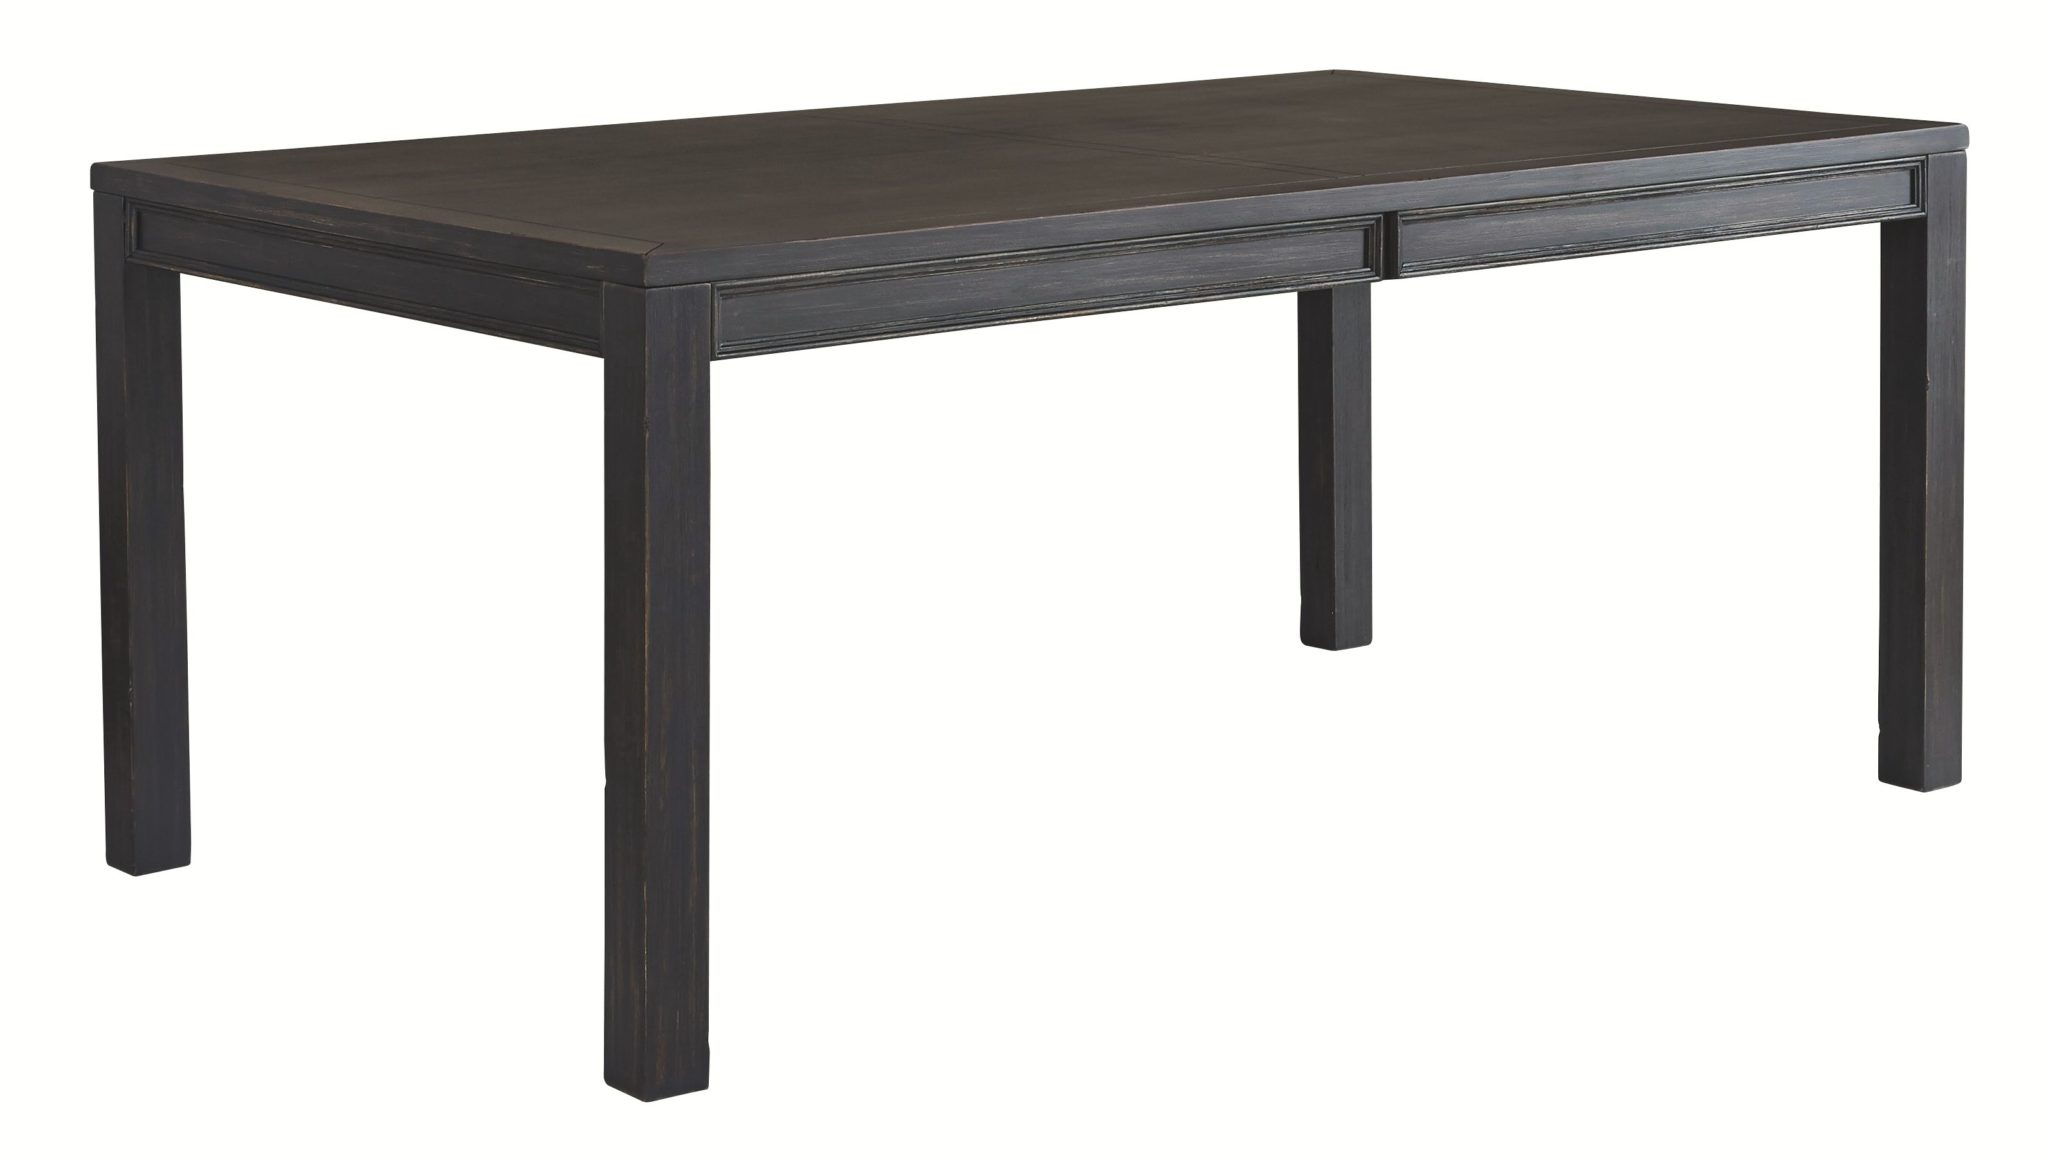 Show Mw A Rectangular Dining Room Table